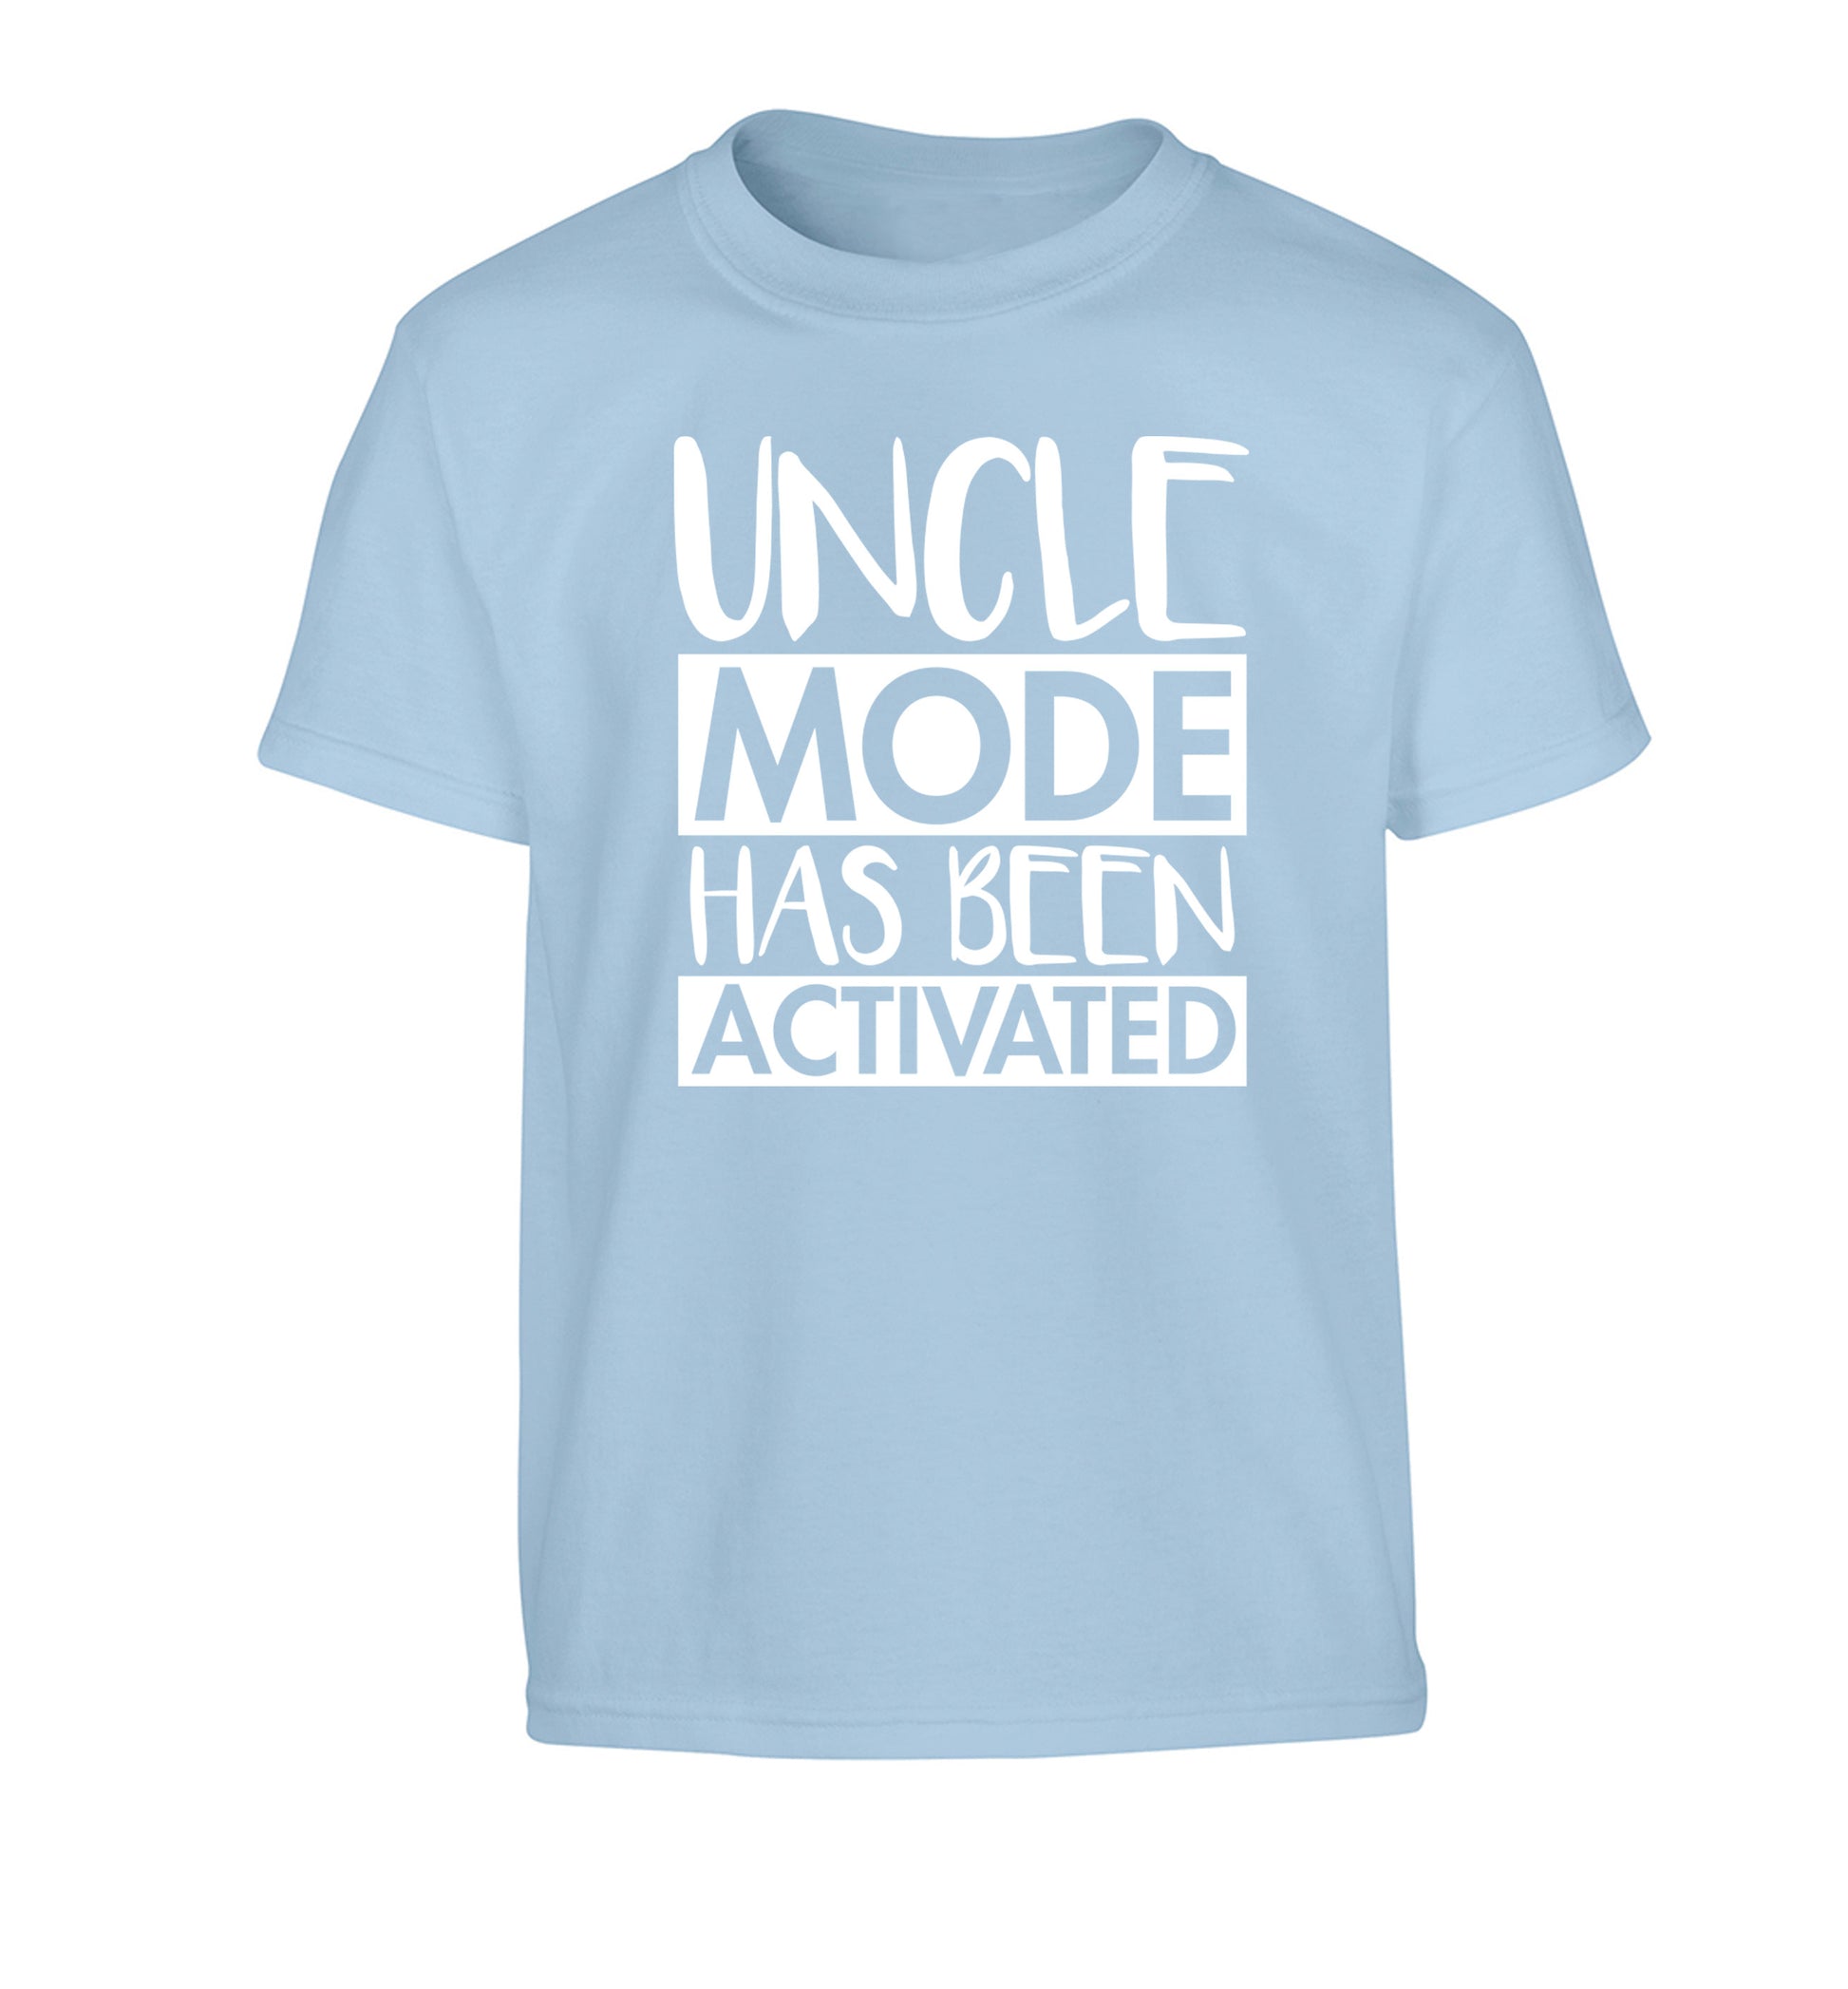 Uncle mode activated Children's light blue Tshirt 12-14 Years